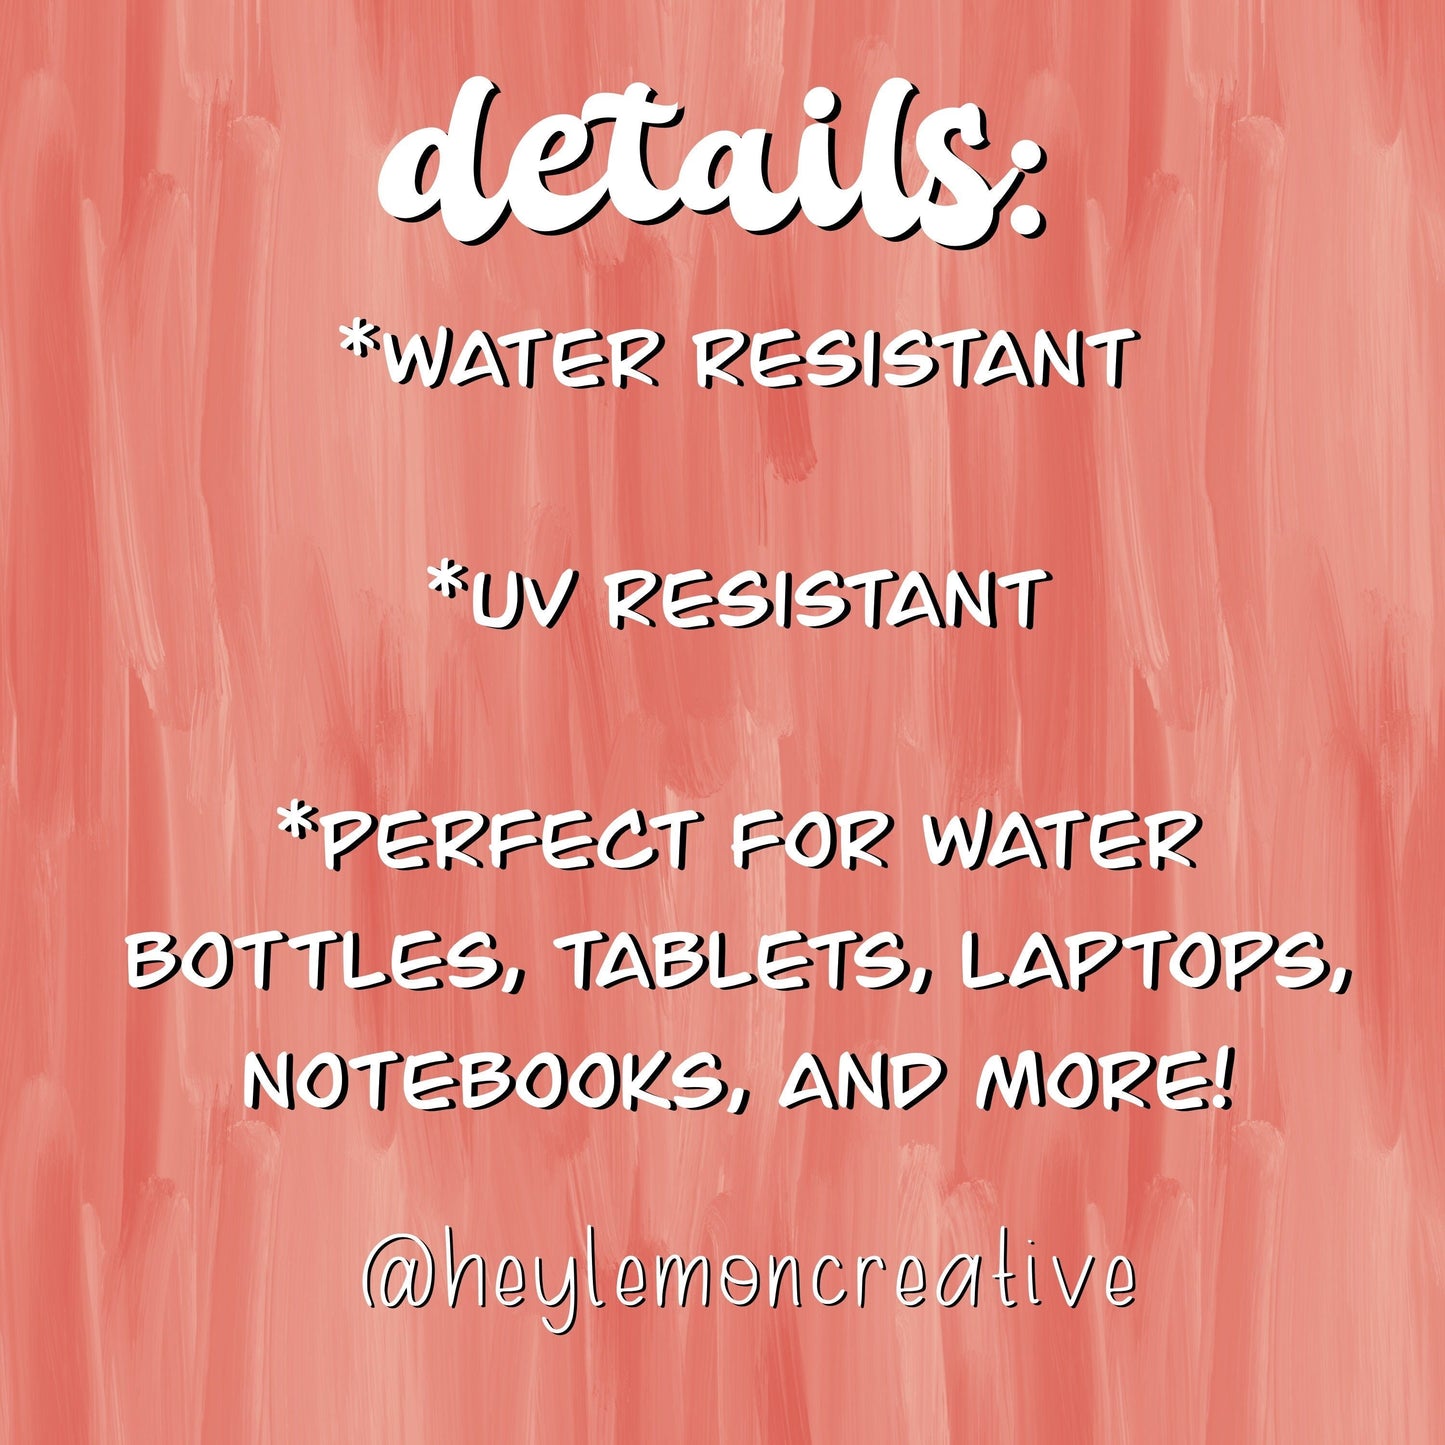 We Can&#39;t All Be Neurotypical, Janet Matte Water Resistant Sticker